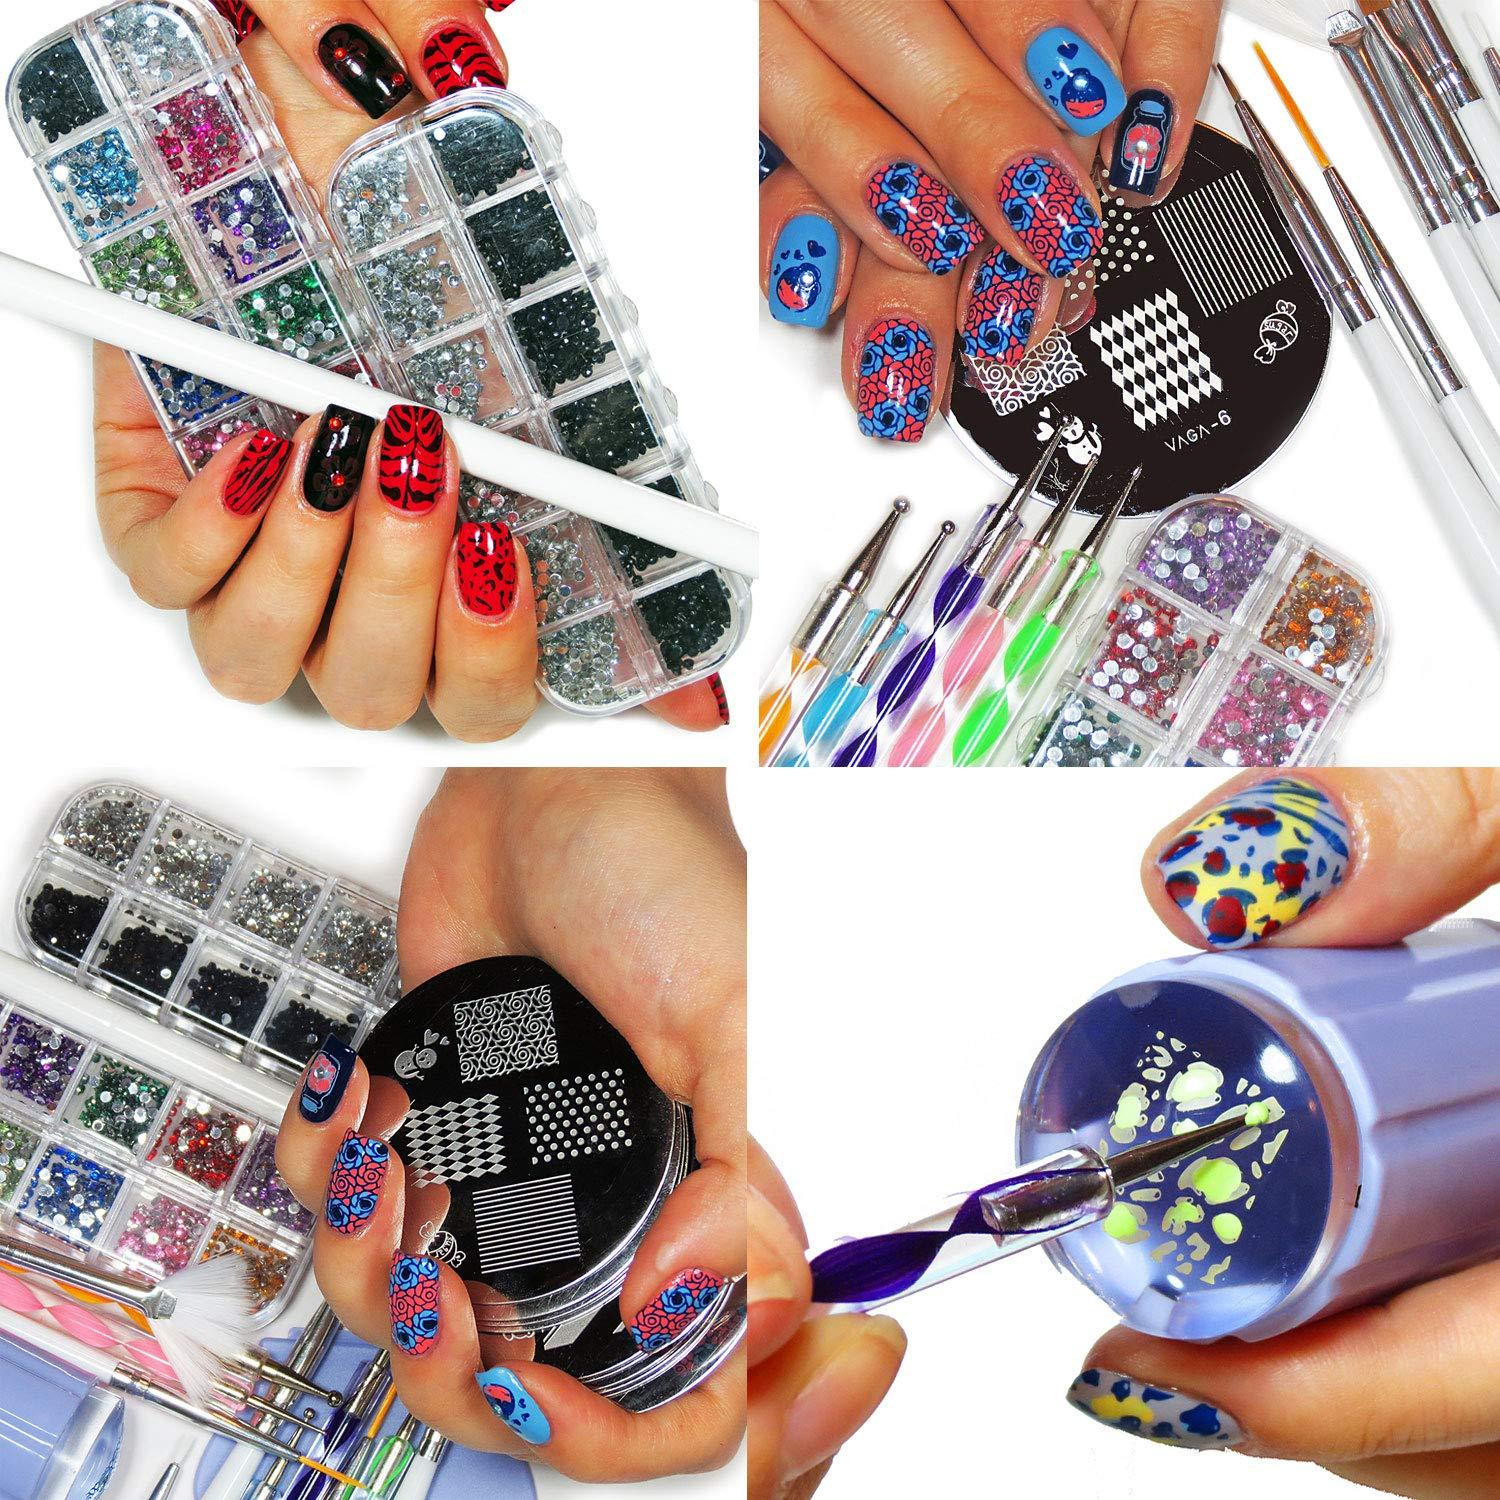 VAGA Manicure Set Nail Art Supplies Nail Kit 2 Boxes of 1500 Gemstones  Crystals Gems Stampers Scrapers Stamping Plates Dotting Tools Nails Brushes  and Rhinestones Decorations Picker Pencil